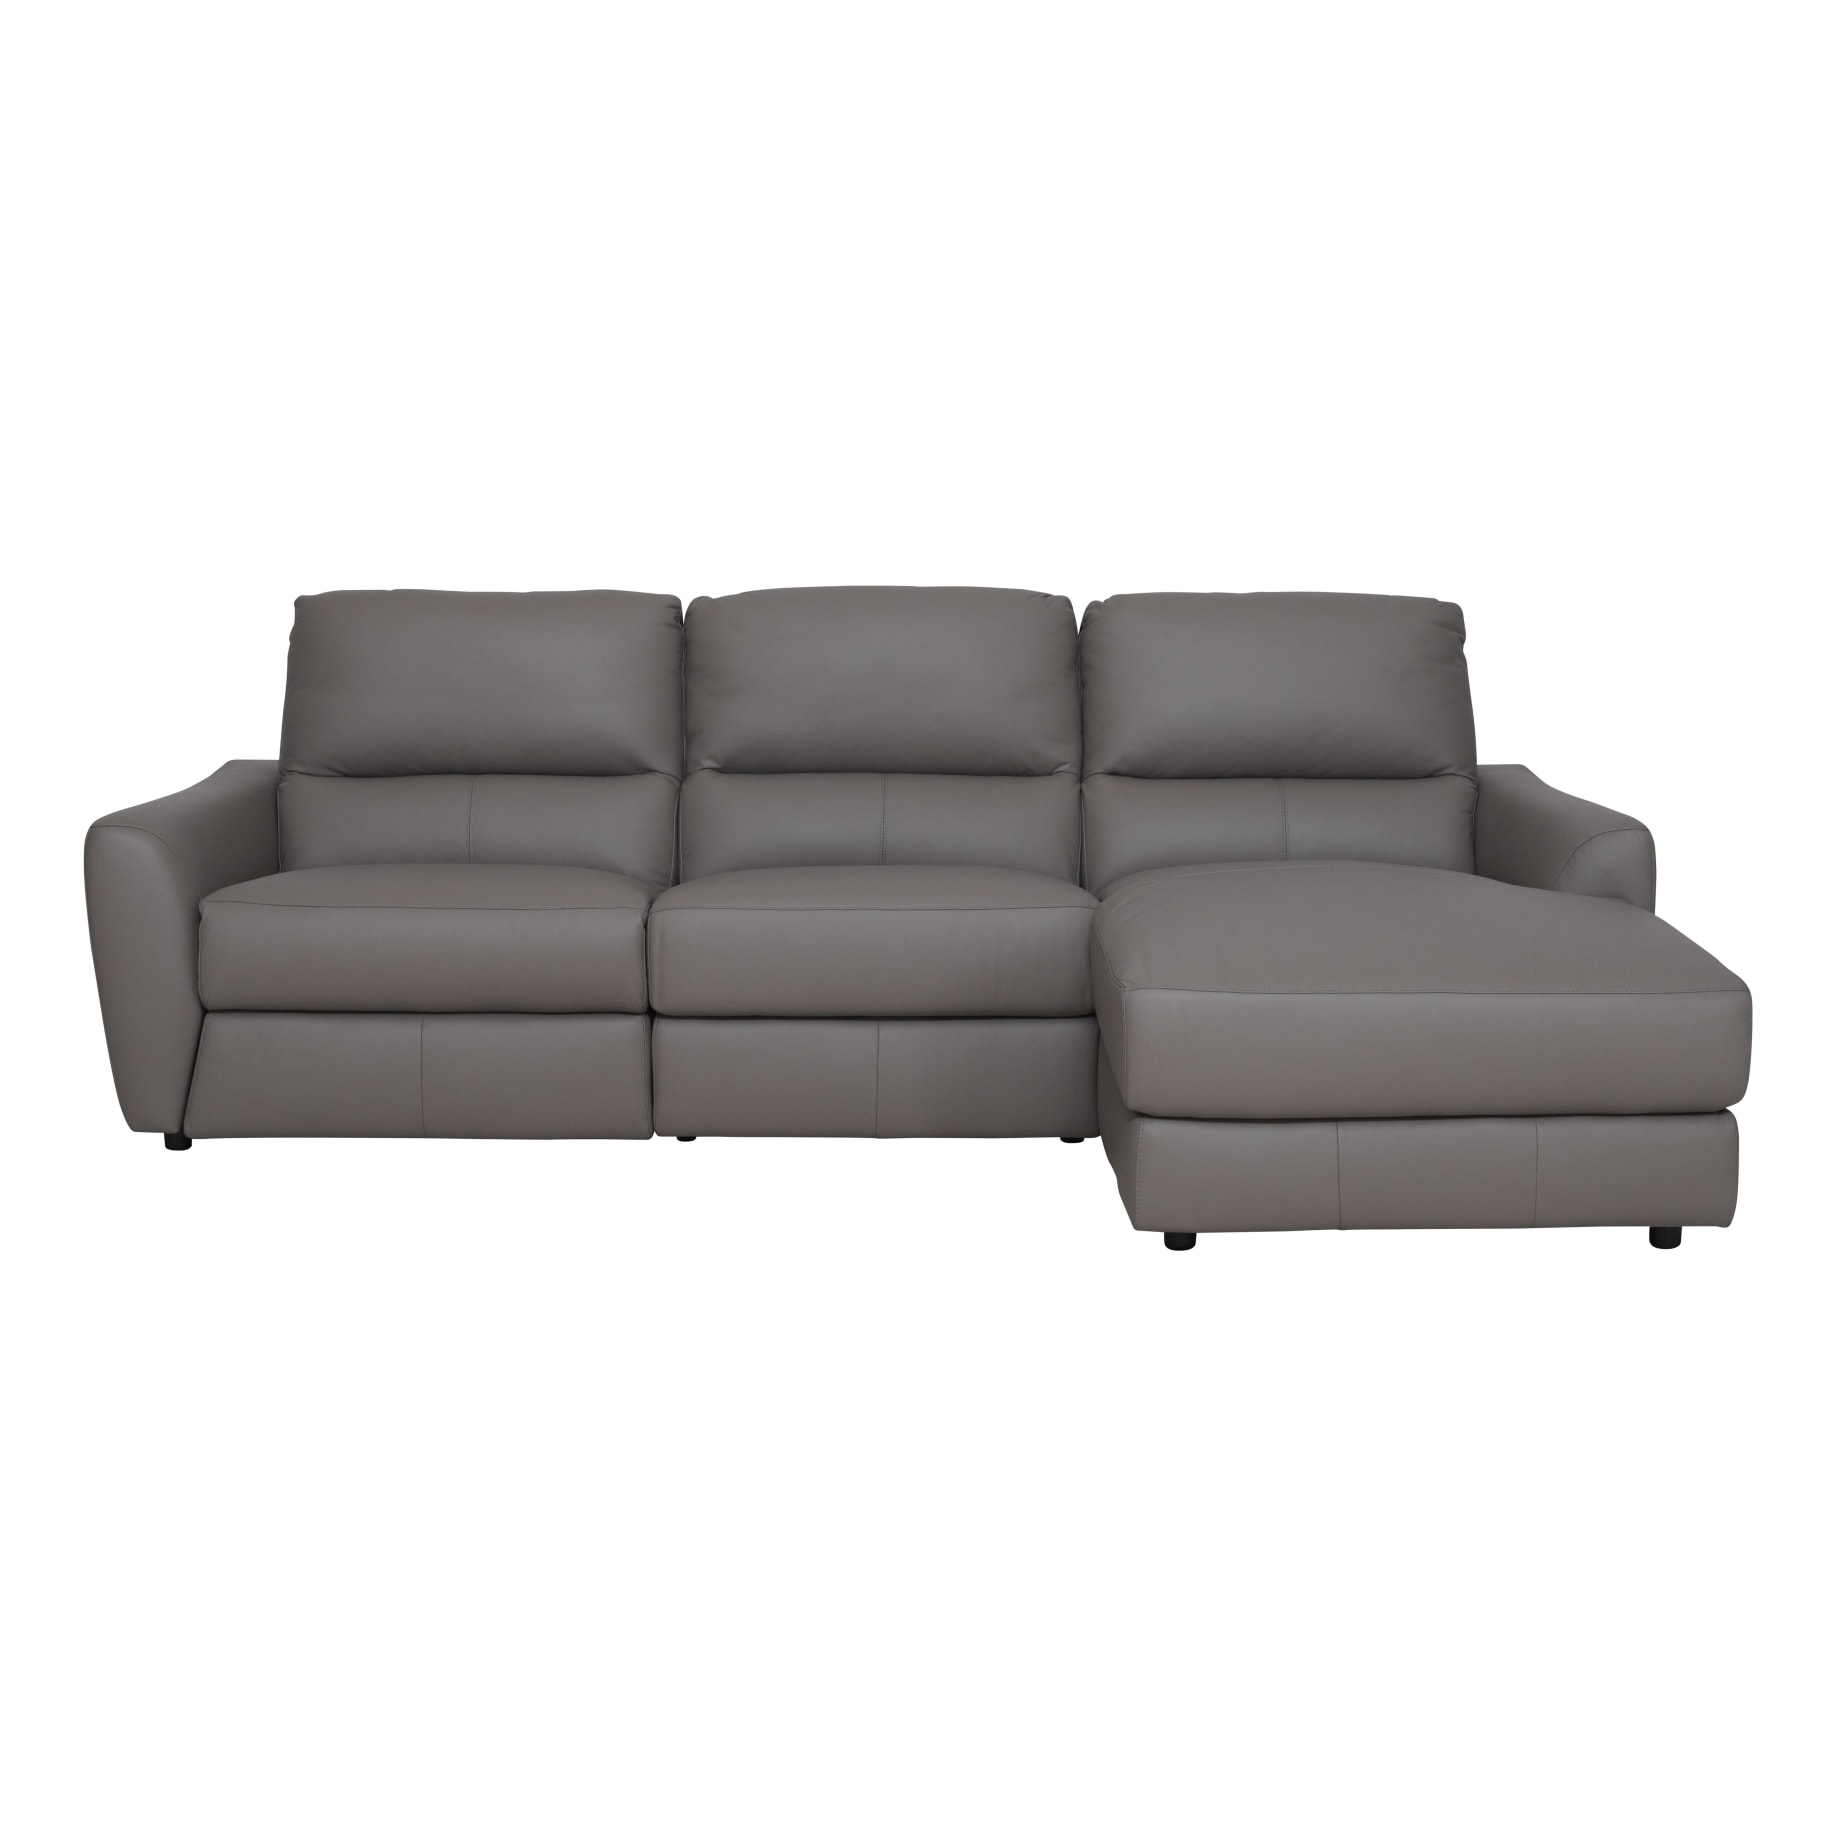 Portland 3 Seater Recliner Sofa + Chaise RHF in Leather Grey